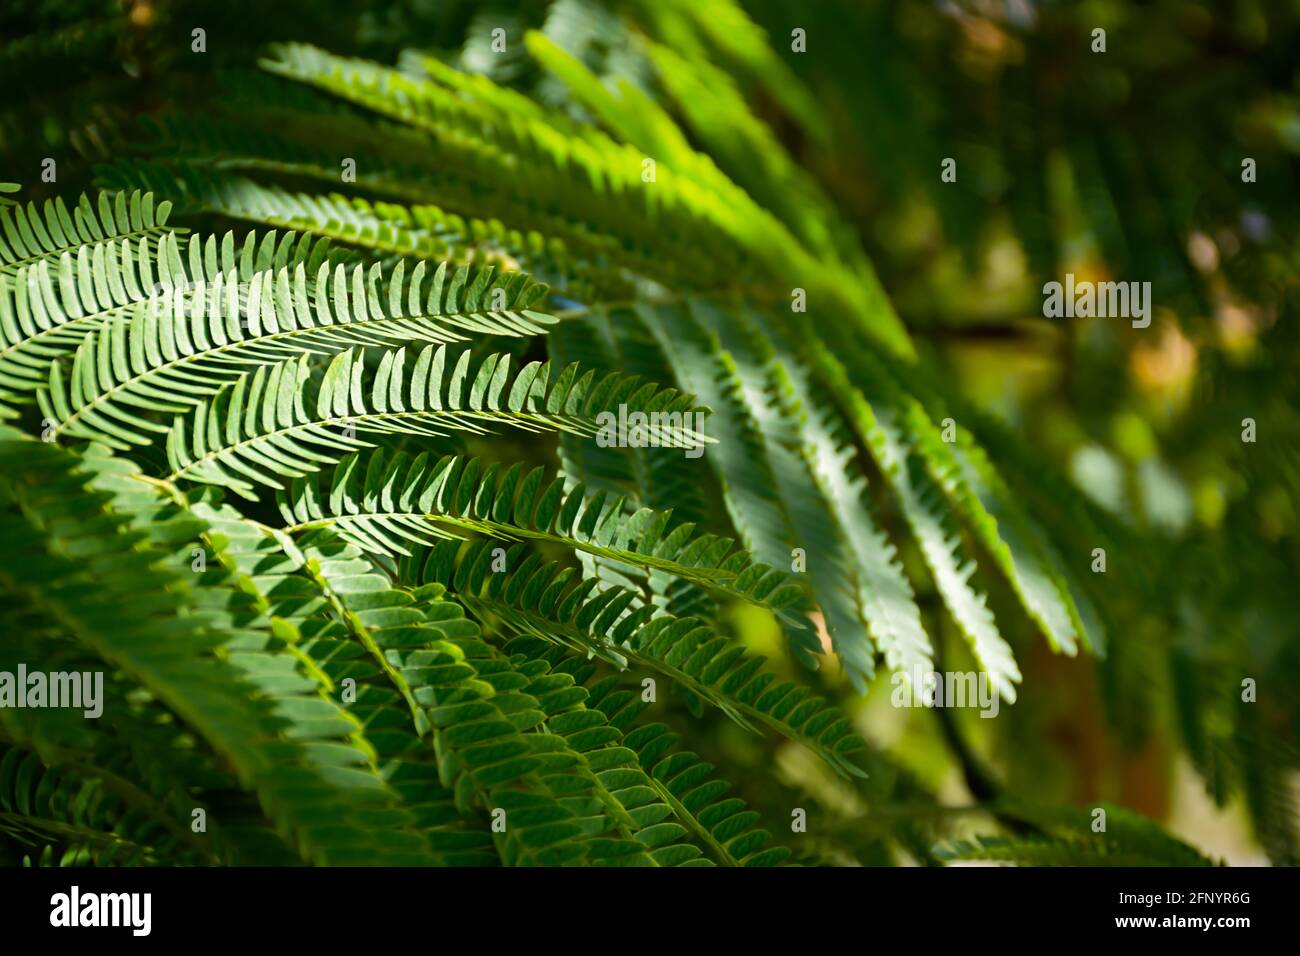 Lenkoran acacia albizia green carved leaves close-up. Summer abstract natural background. Low depth of field with blurring. Copy space, tropical natur Stock Photo